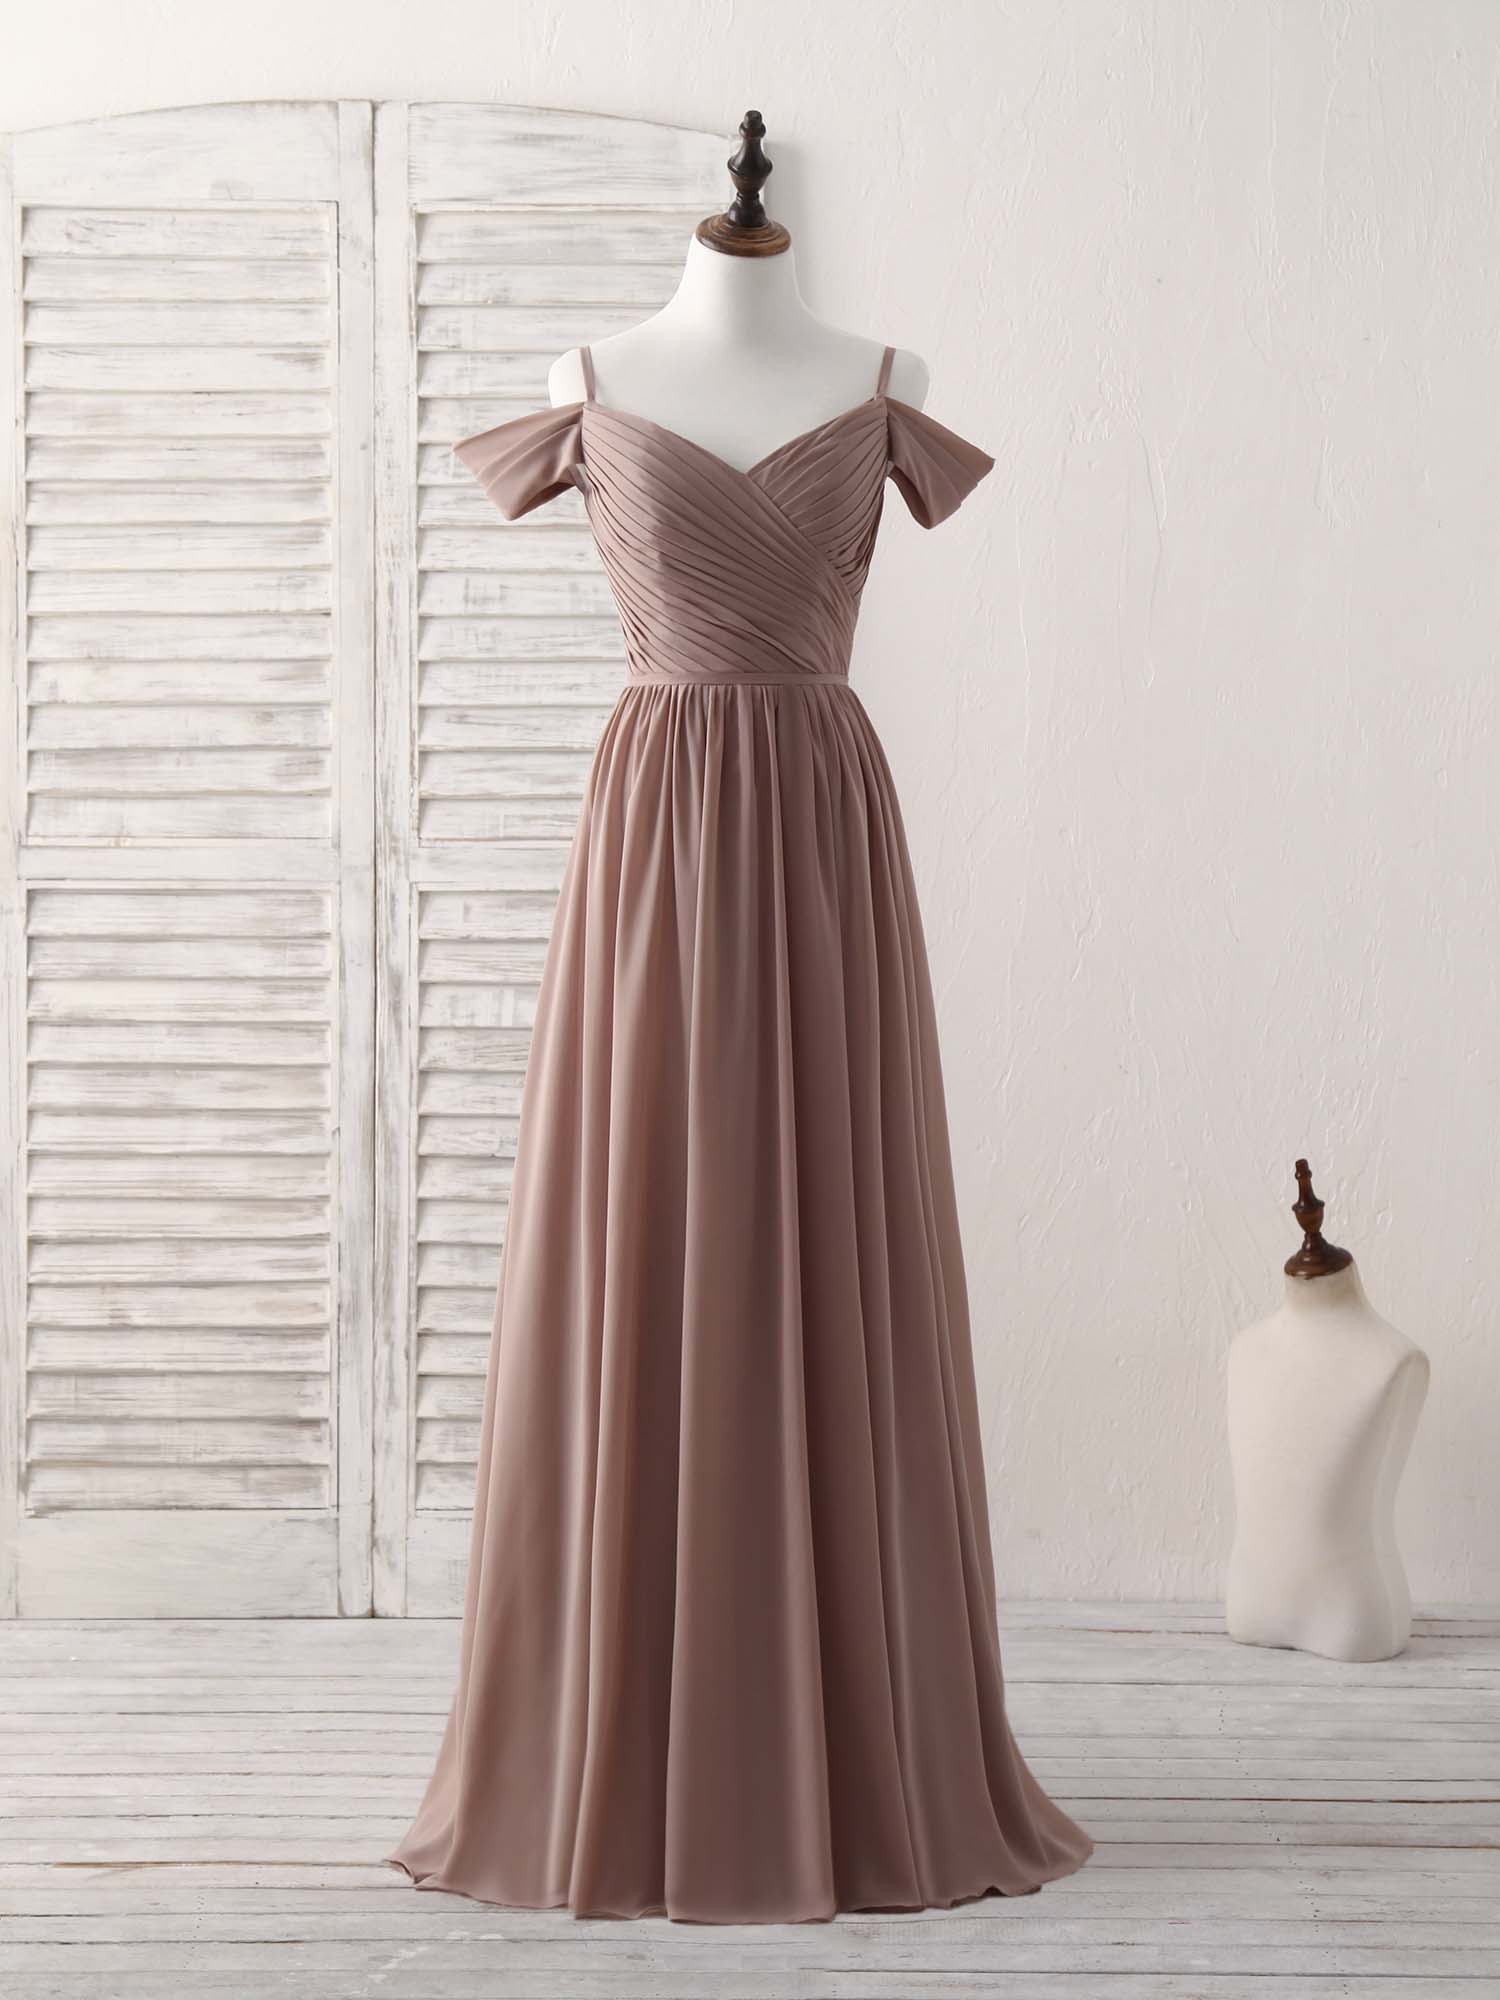 Simple V Neck Dark Champagne Chiffon Long Prom Dress Outfits For Girls, Bridesmaid Dress